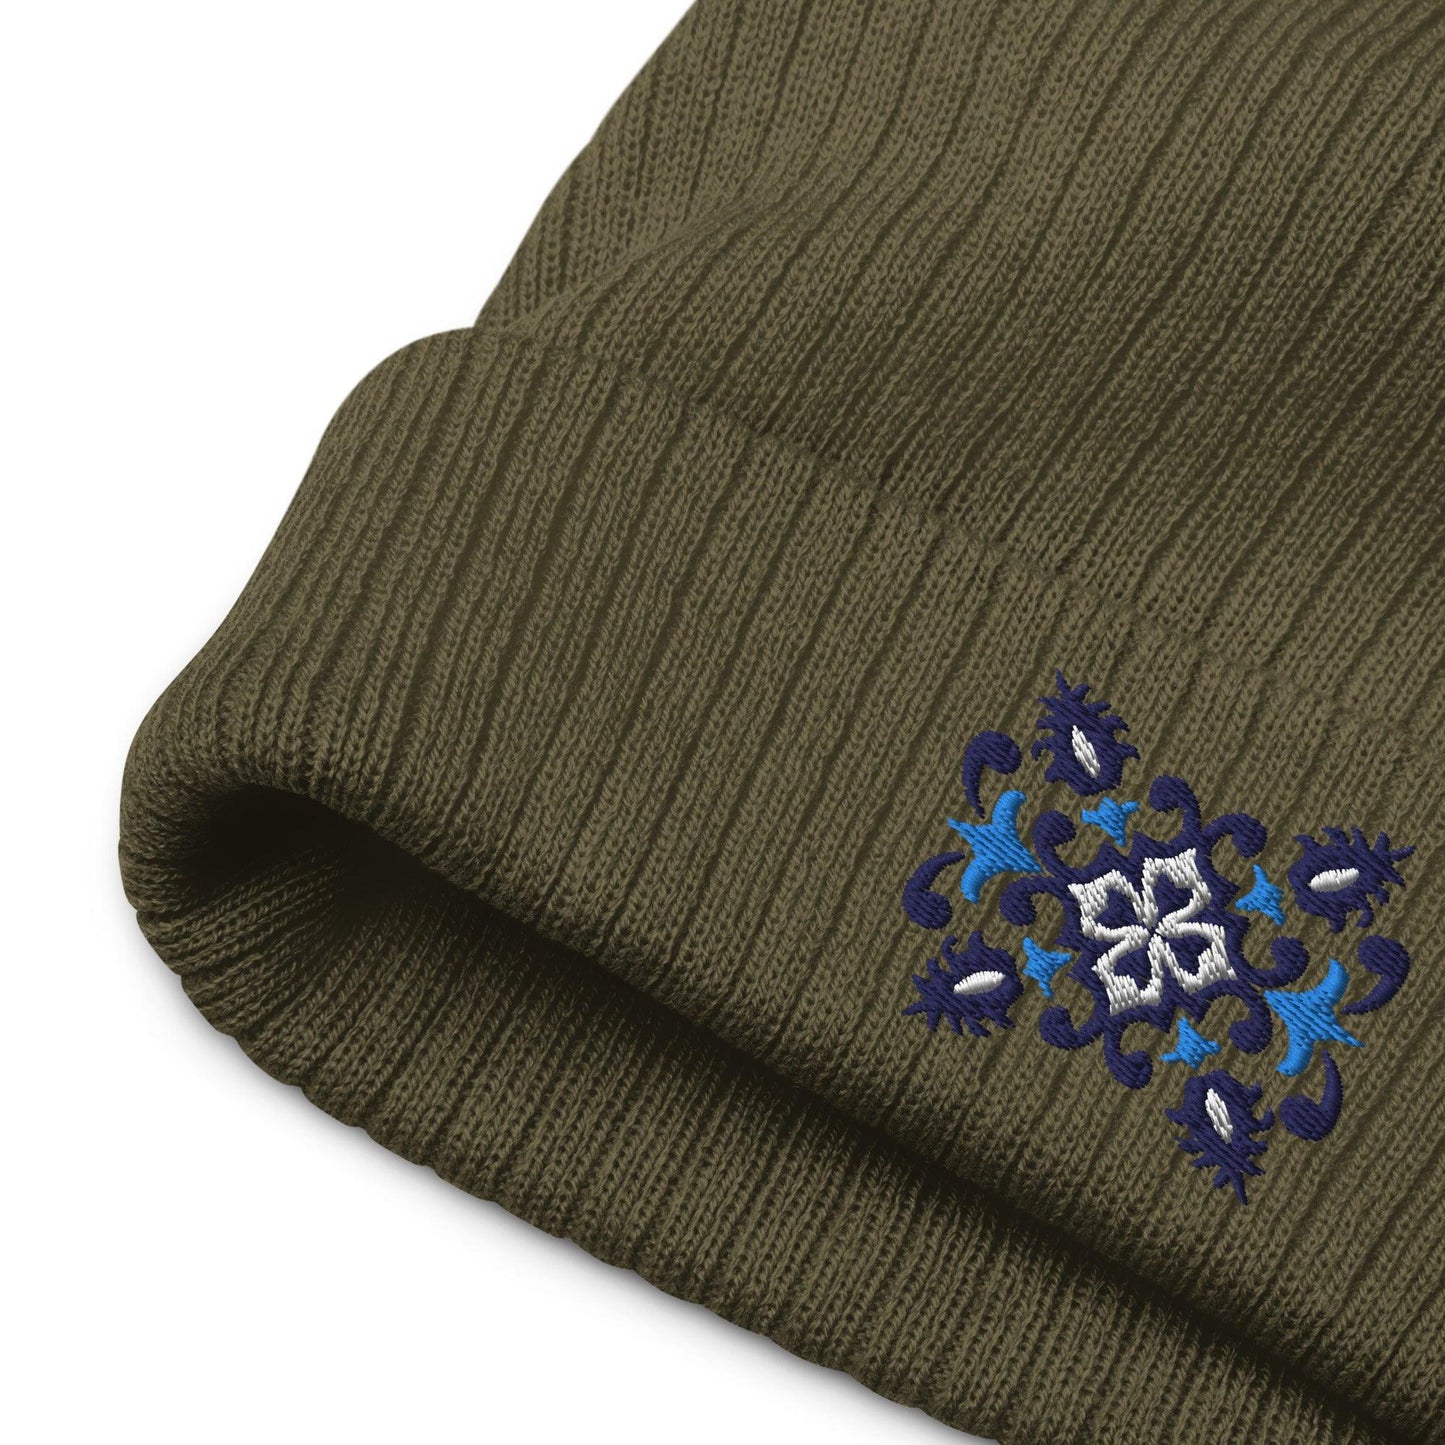 Portuguese Azulejo Tile Motif Embroidered Beanie - The Global Wanderer